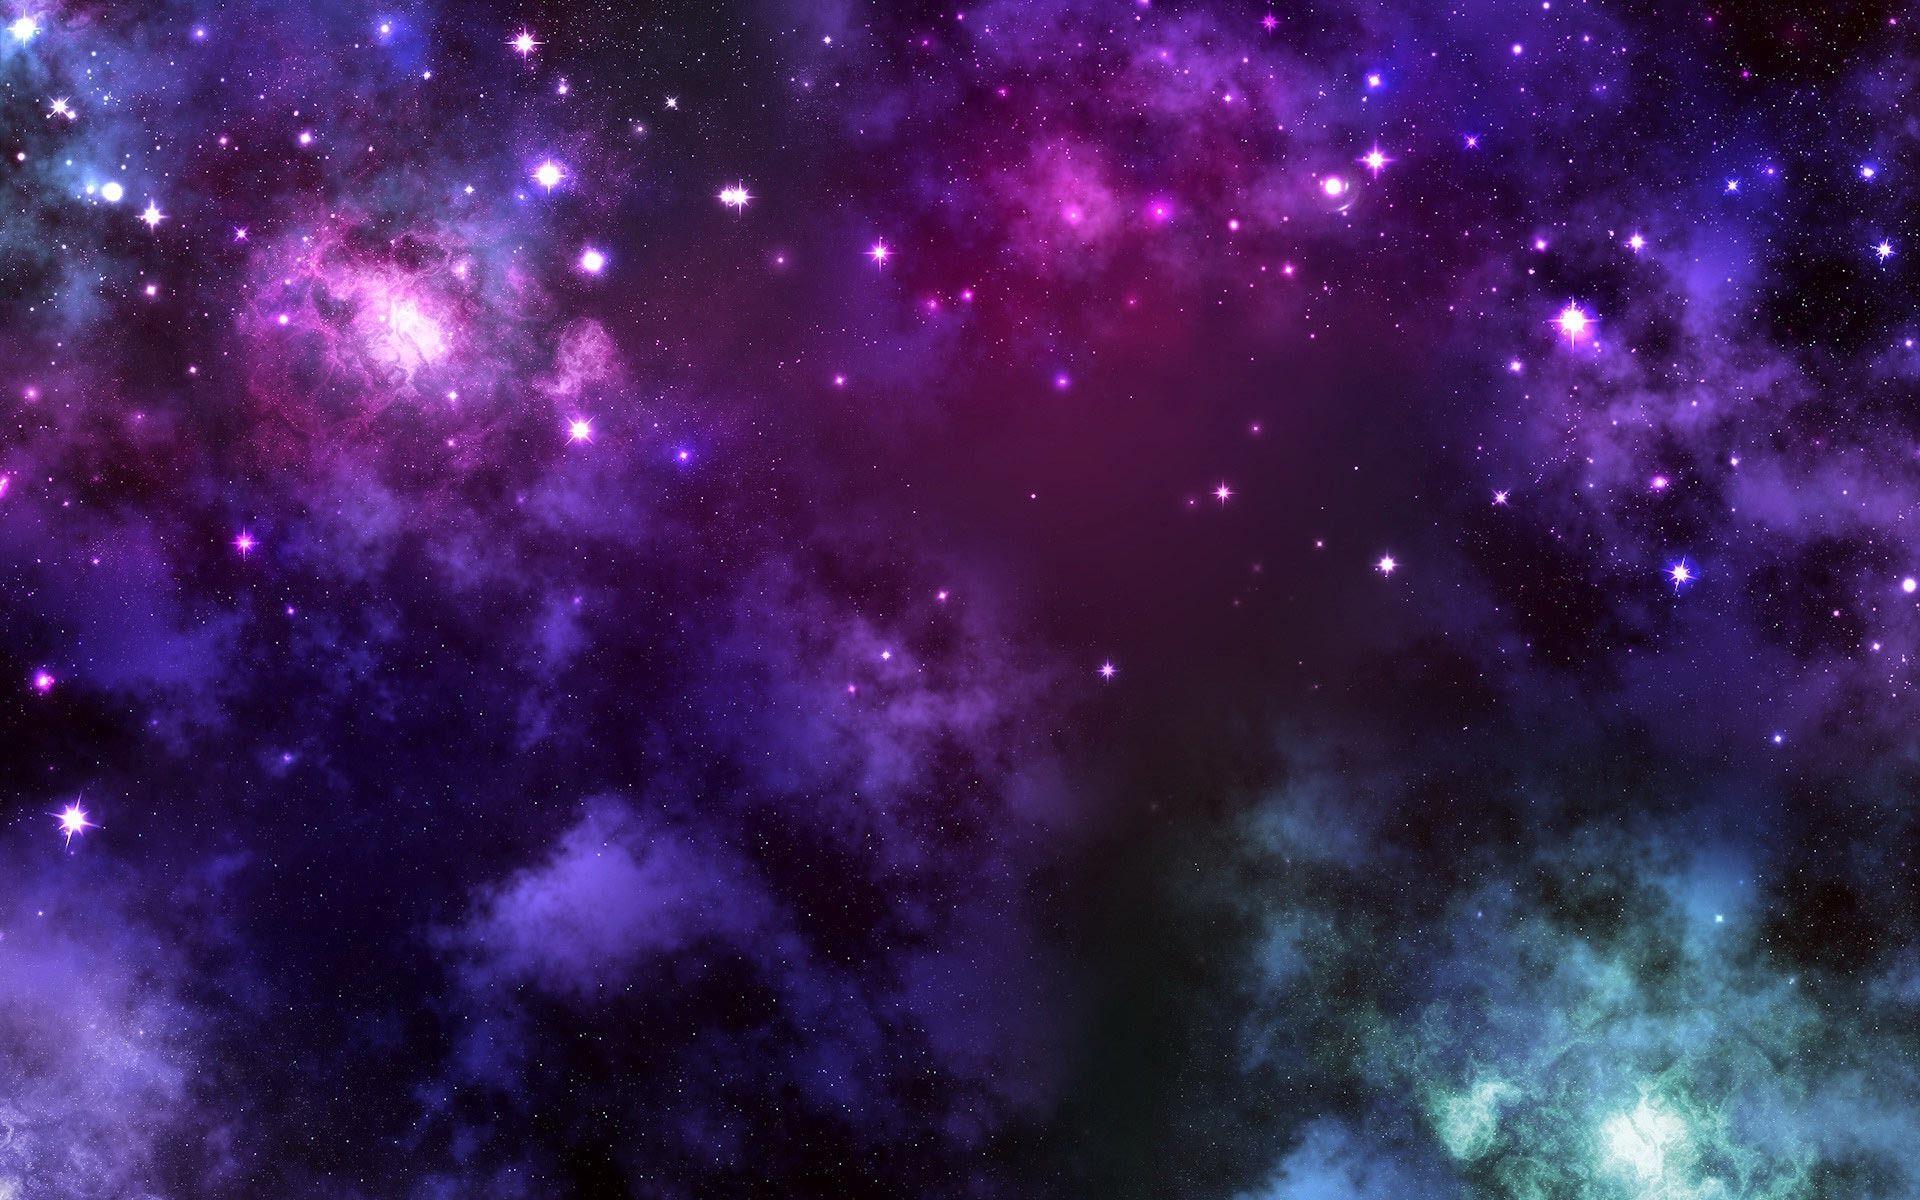 OY:391 Wallpaper Background, Incredible Galactic HD